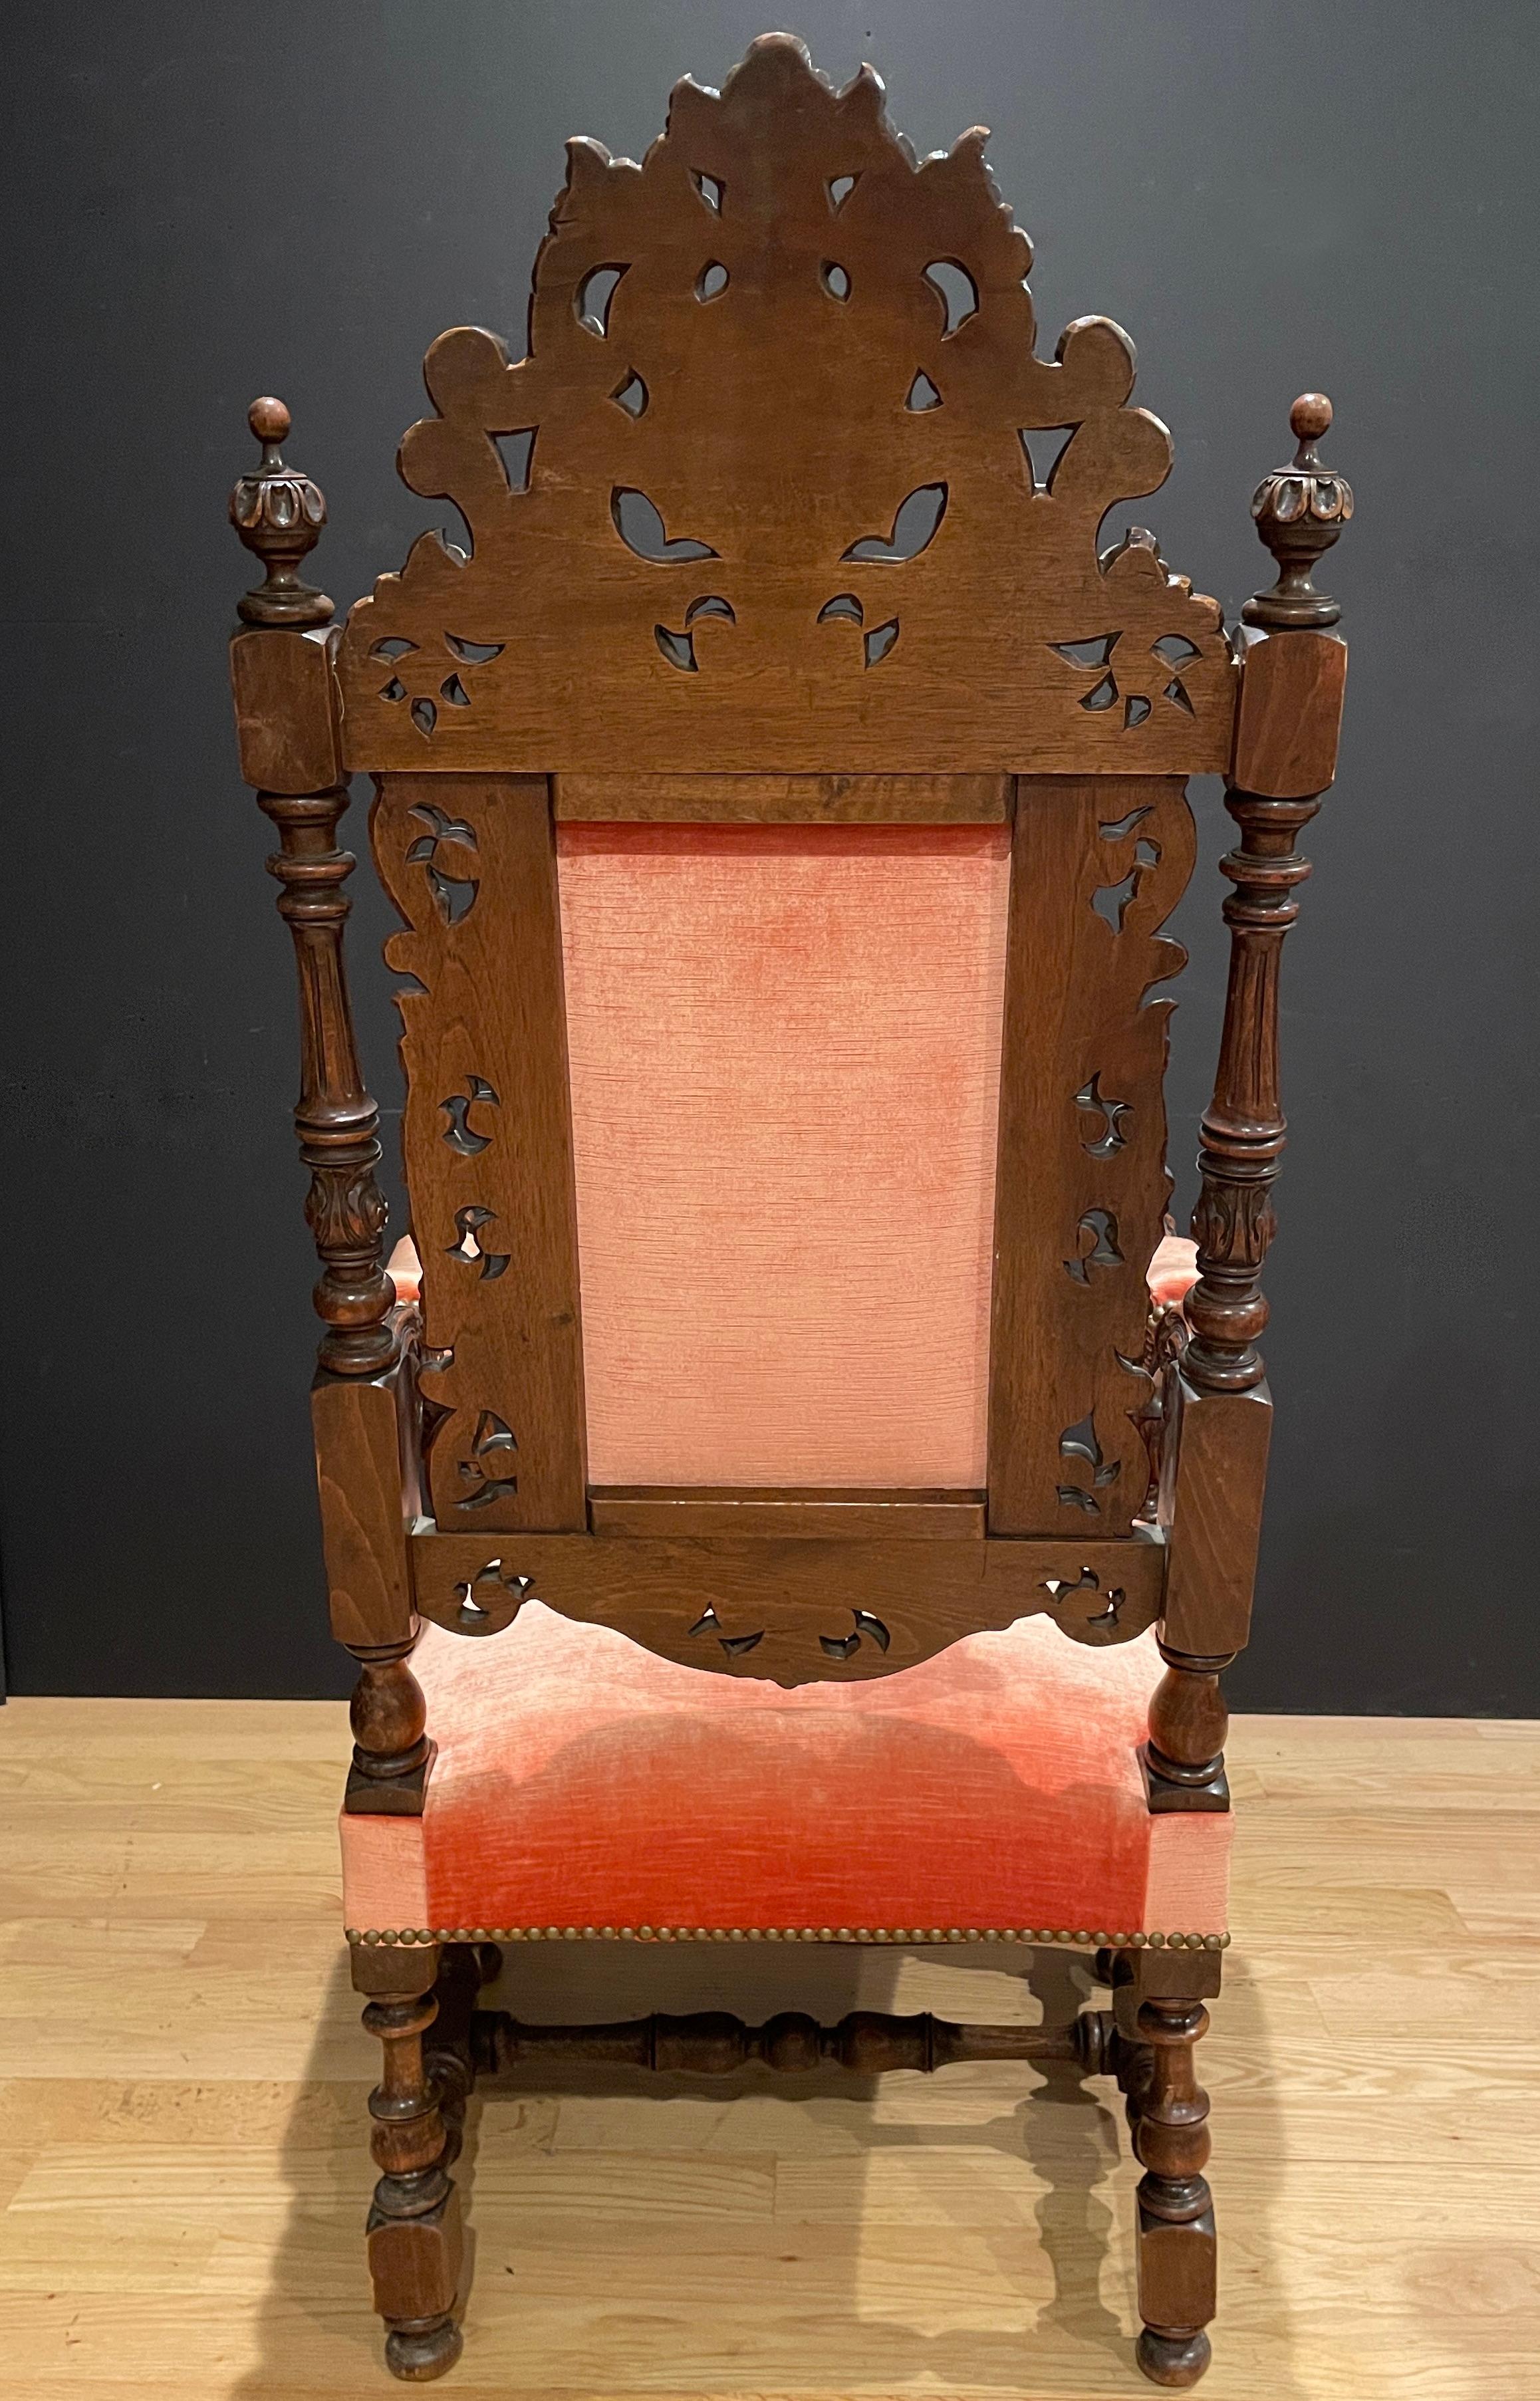 Antique Pair of Carved Walnut Rococo Throne Chairs In Good Condition For Sale In Norwood, NJ